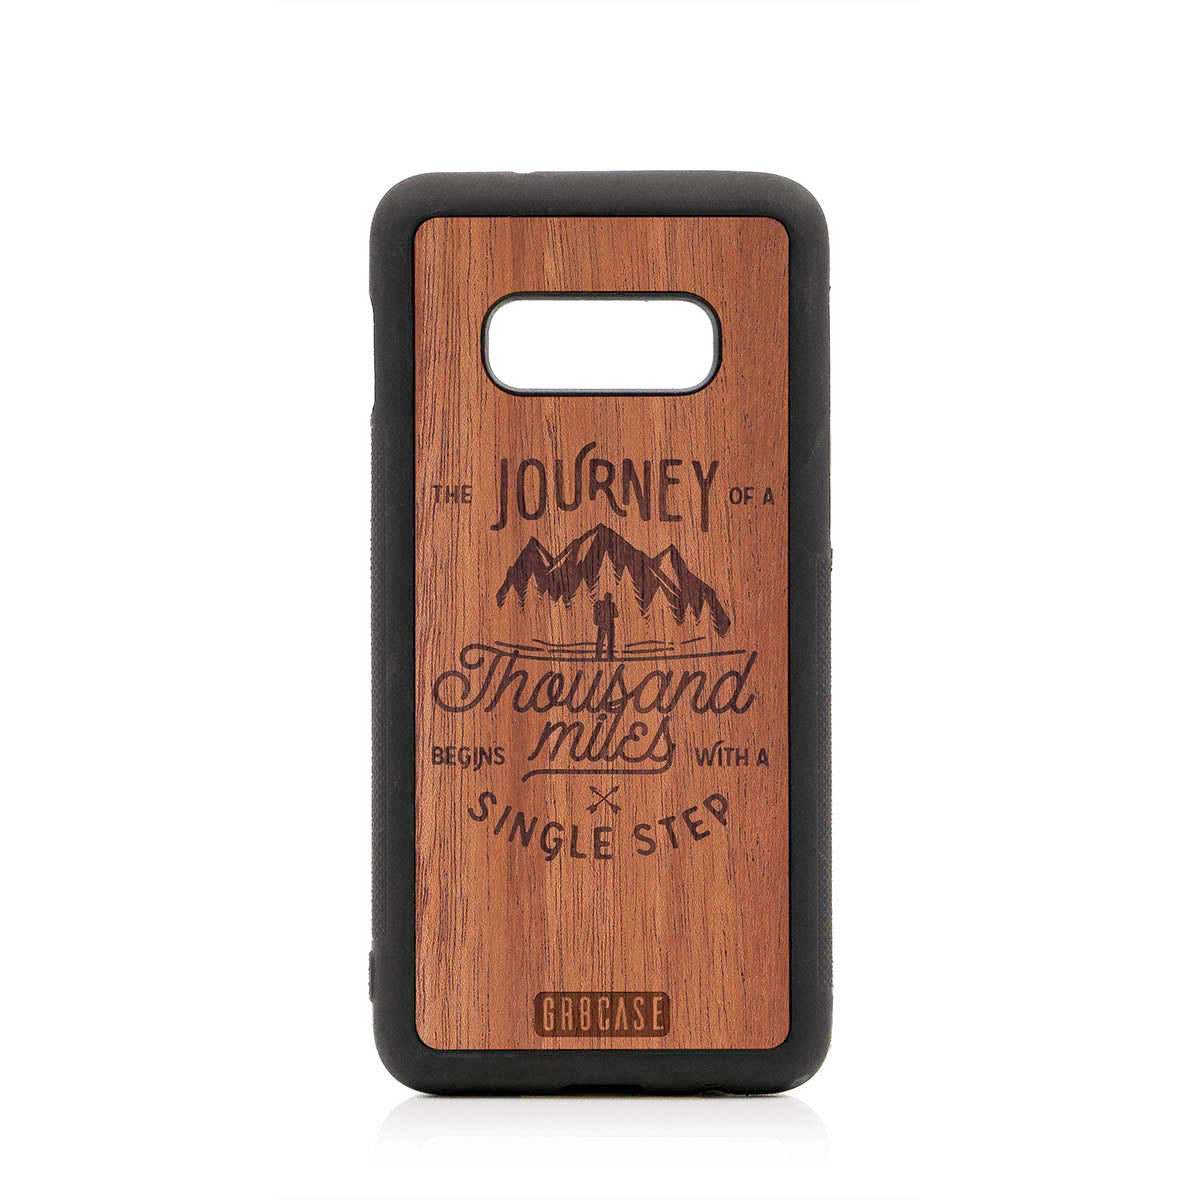 The Journey Of A Thousand Miles Begins With A Single Step Design Wood Case For Samsung Galaxy A10E